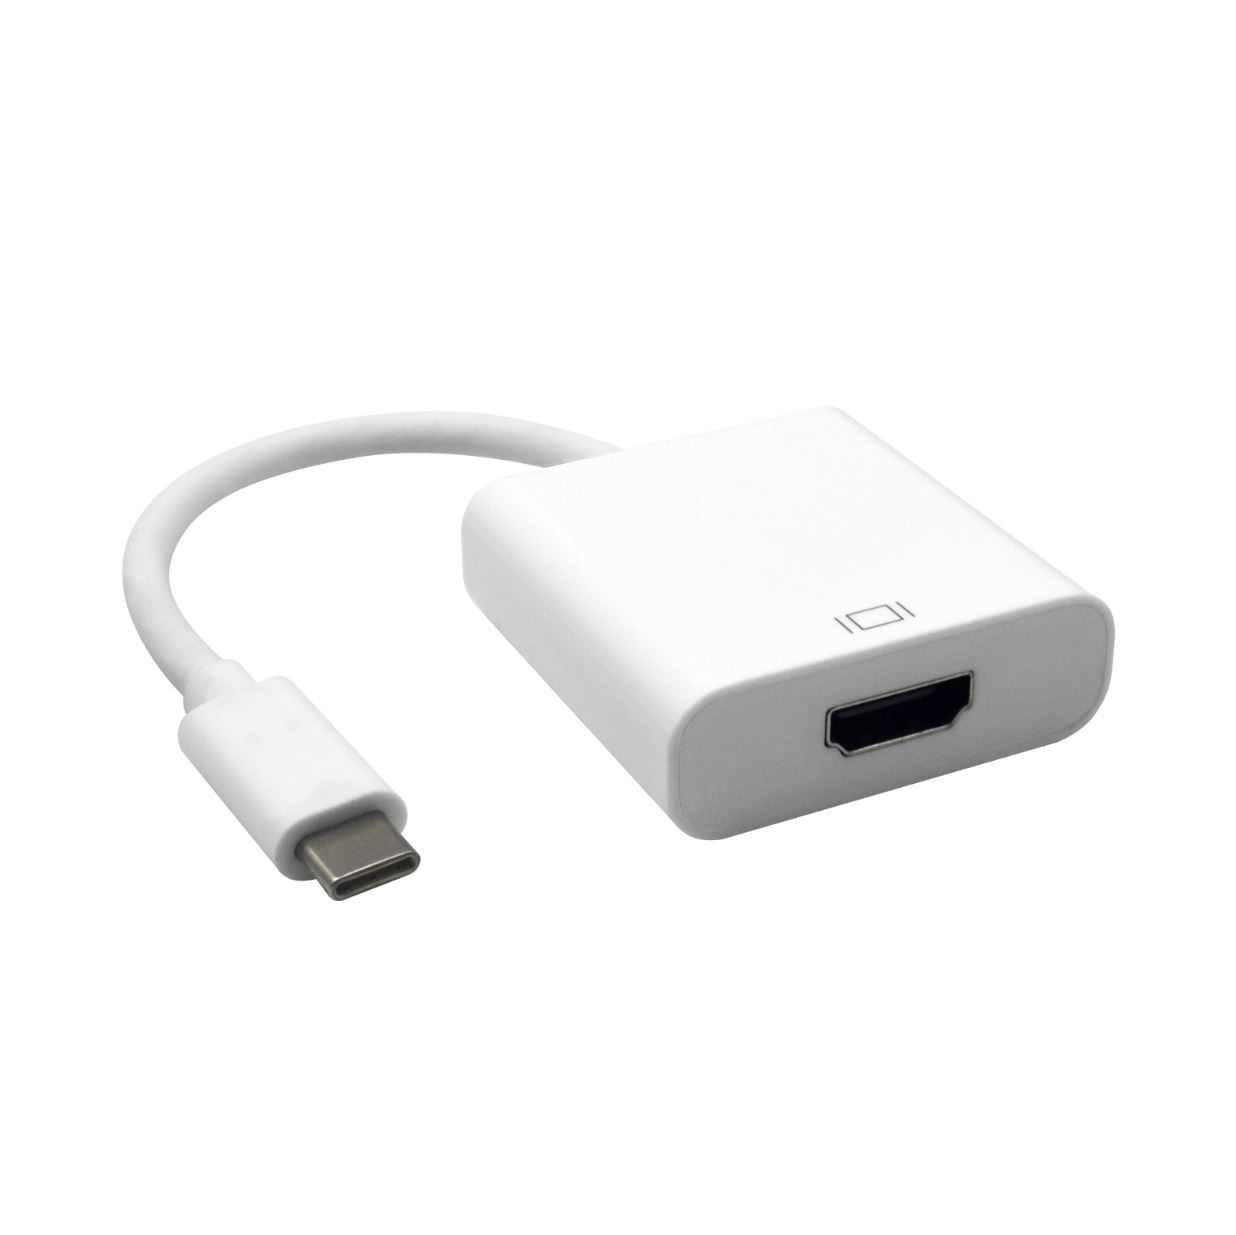 Astrotek Thunderbolt USB 3.1 Type C (USB-C) to HDMI Video Adapter Converter Male to Female for Apple Macbook Chromebook Pixel White